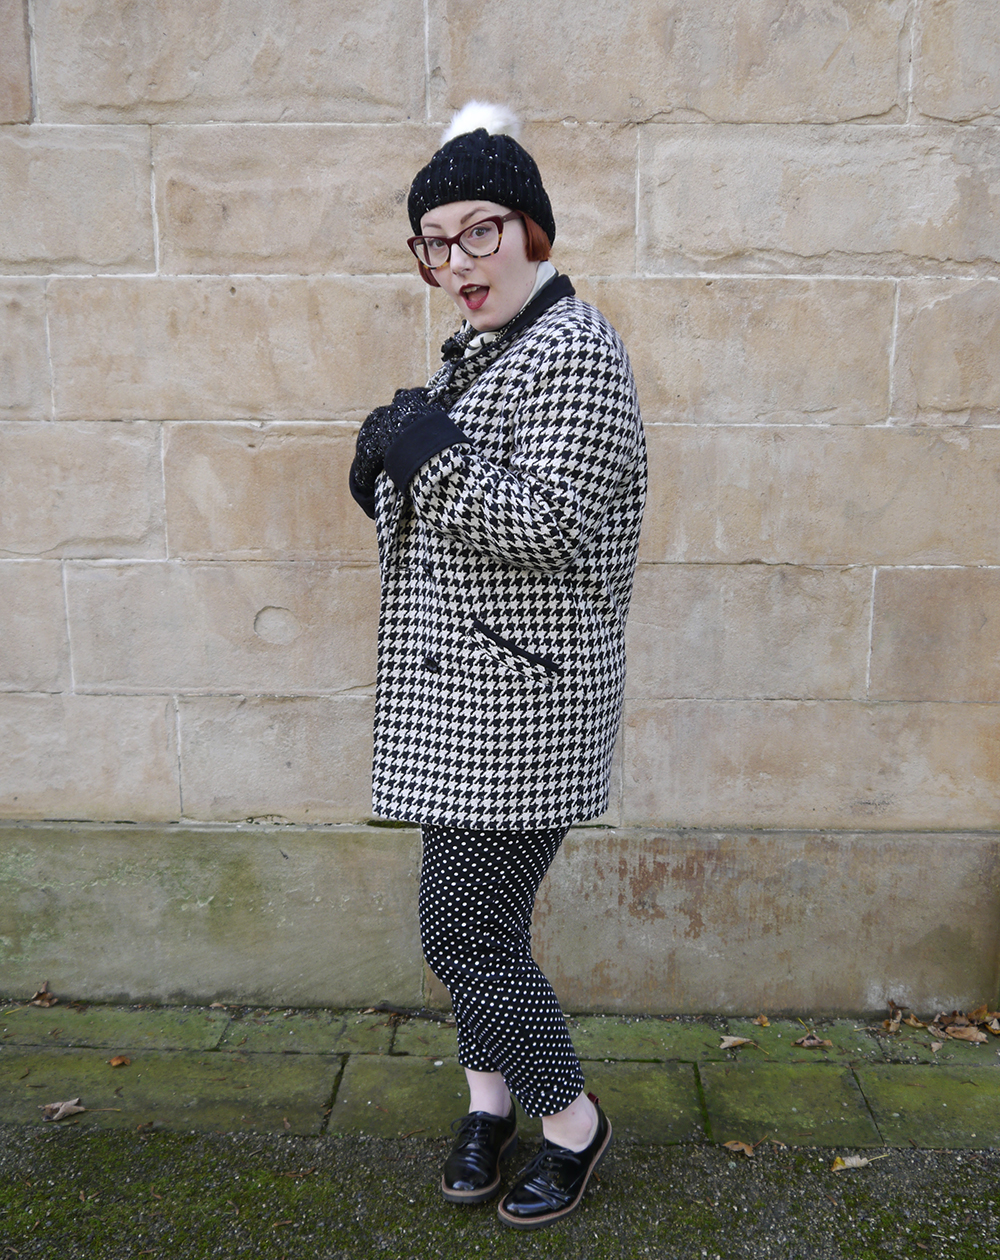 Styled by Helen, Scottish blogger, Wardrobe Conversations, Dundee blogger, winter outfit, winter style, dressing for winter, monochrome outfit, monochrome street style, winter accessories, Tiger, charity shop find, clashing patterns, black and white outfit